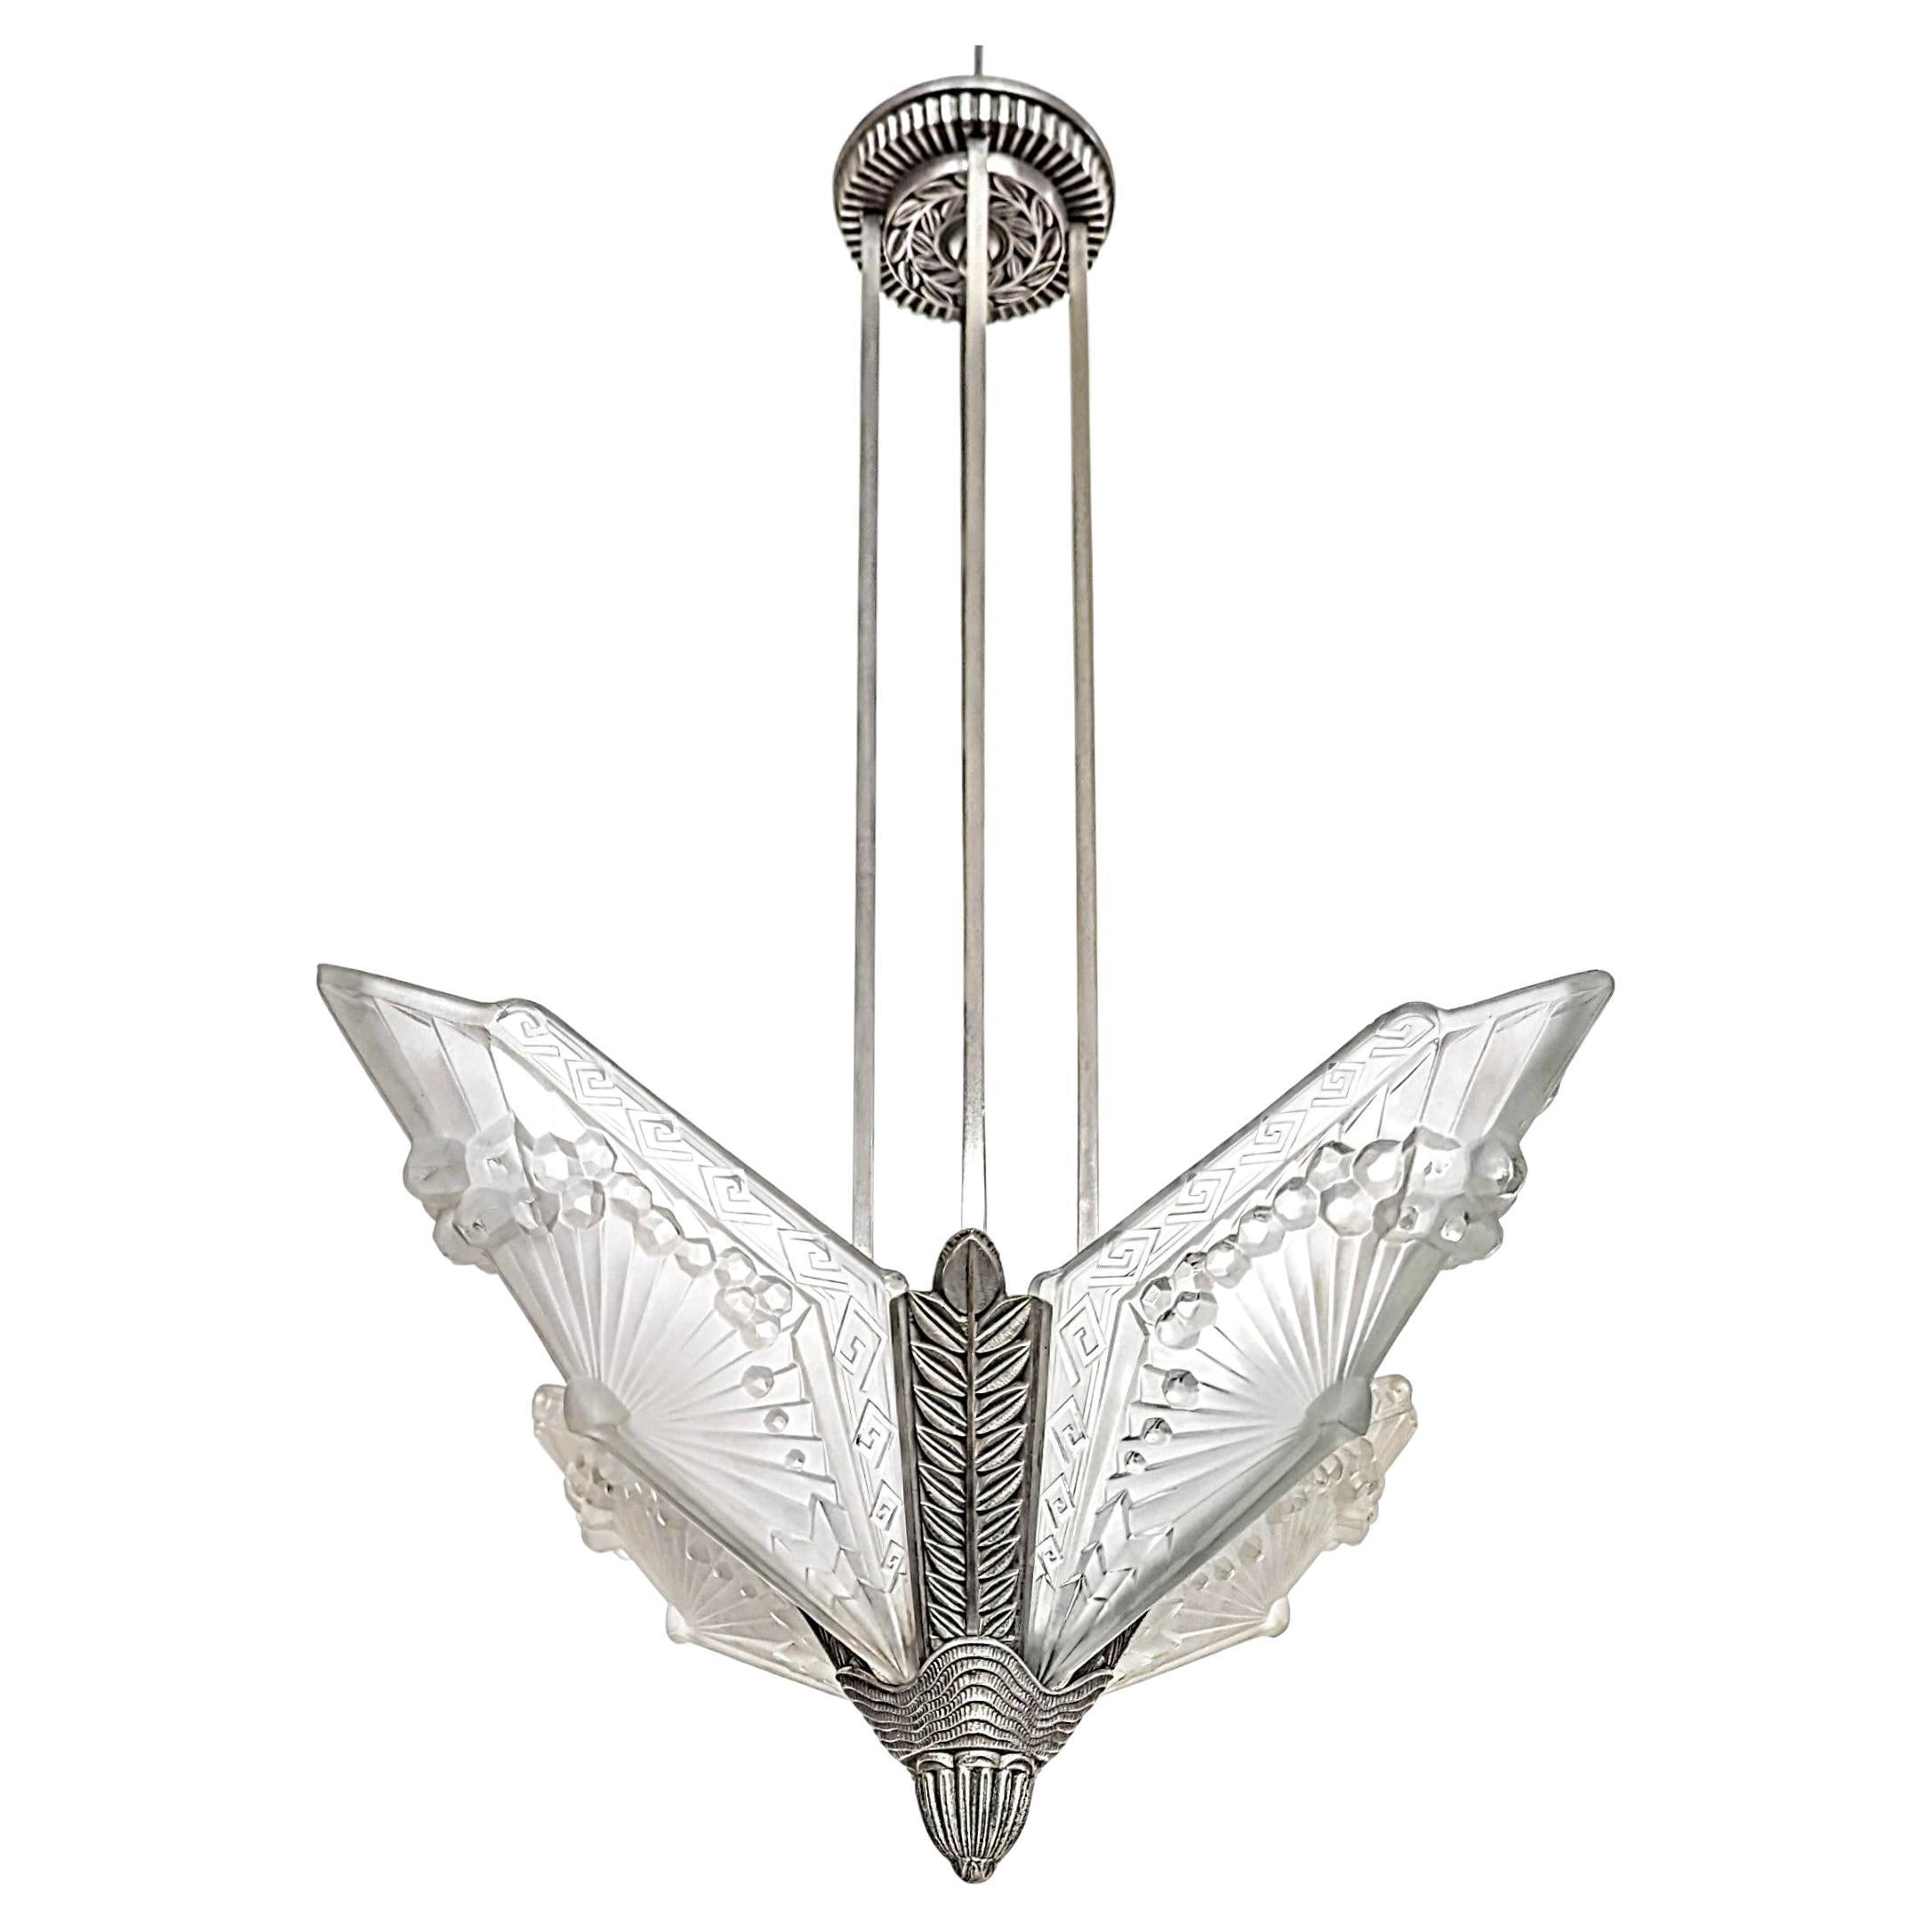 French Art Deco chandelier known as the Dragonfly was created by the French Artist 